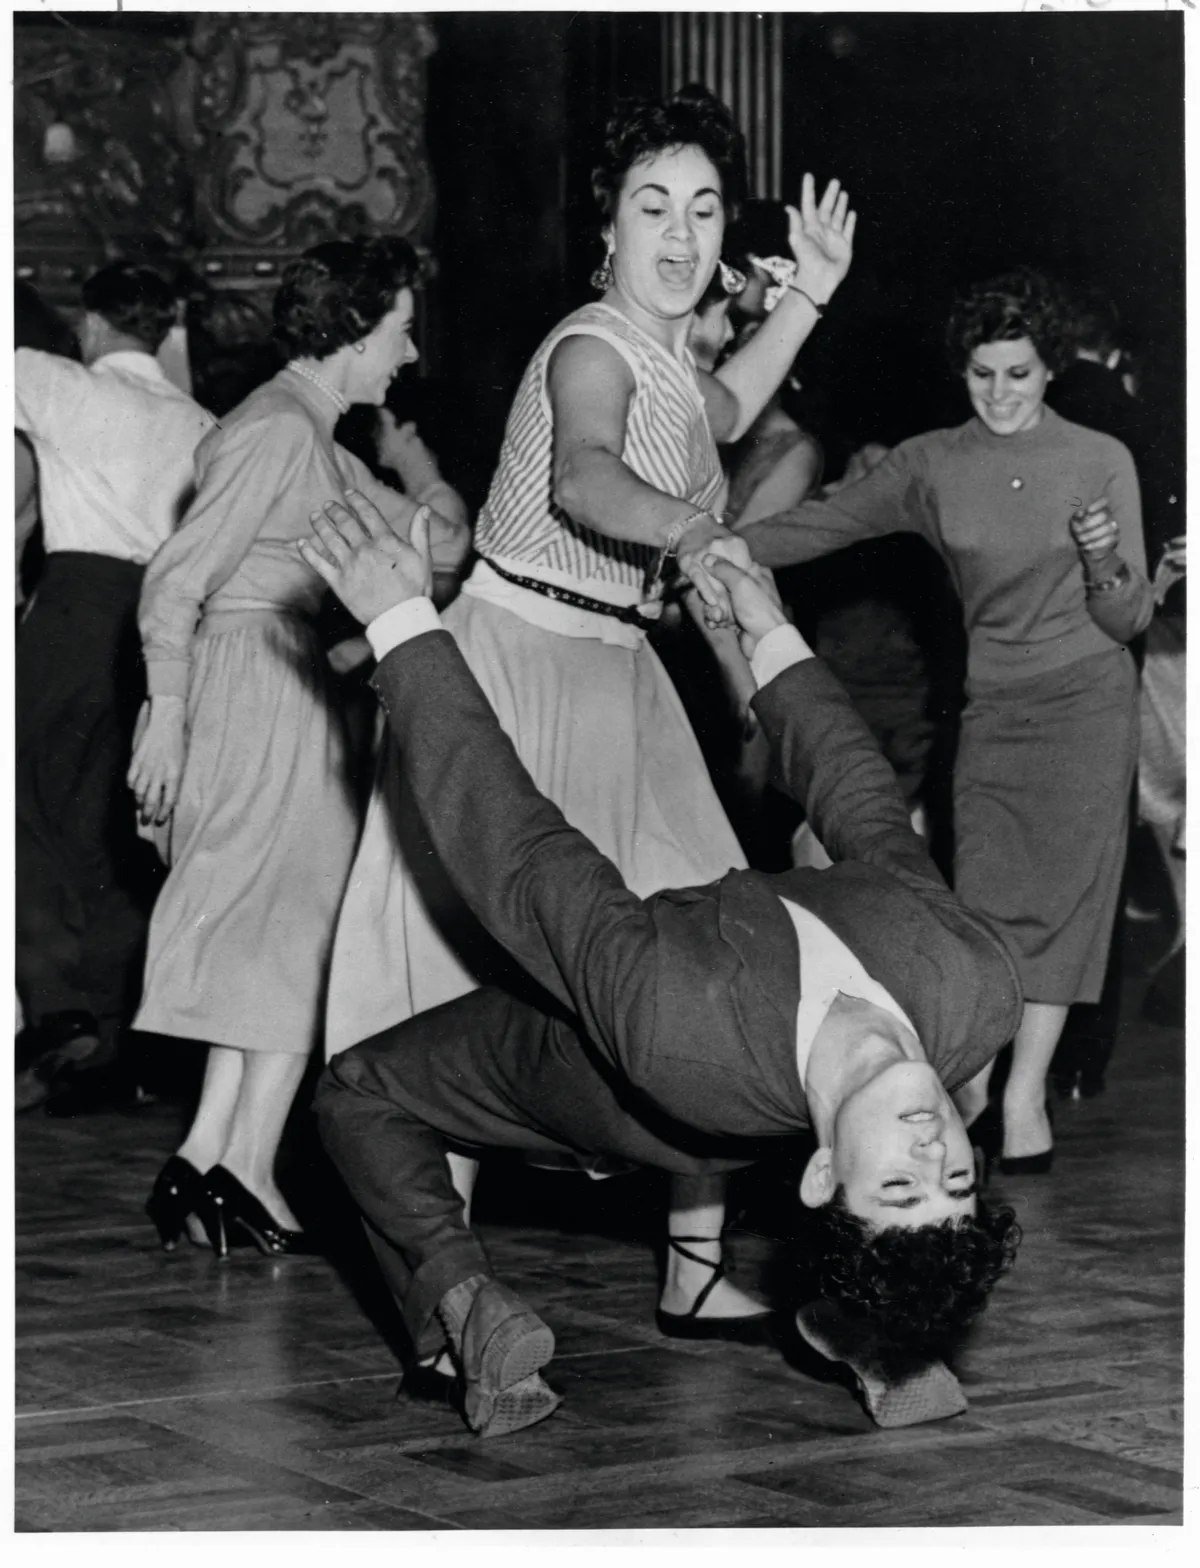 A woman holds a man by his hand as he dips down on the crowded dance floor at the London Dance Hall. | Location: London Dance Hall, London, England, UK. (Photo by Library of Congress/Corbis/VCG via Getty Images)